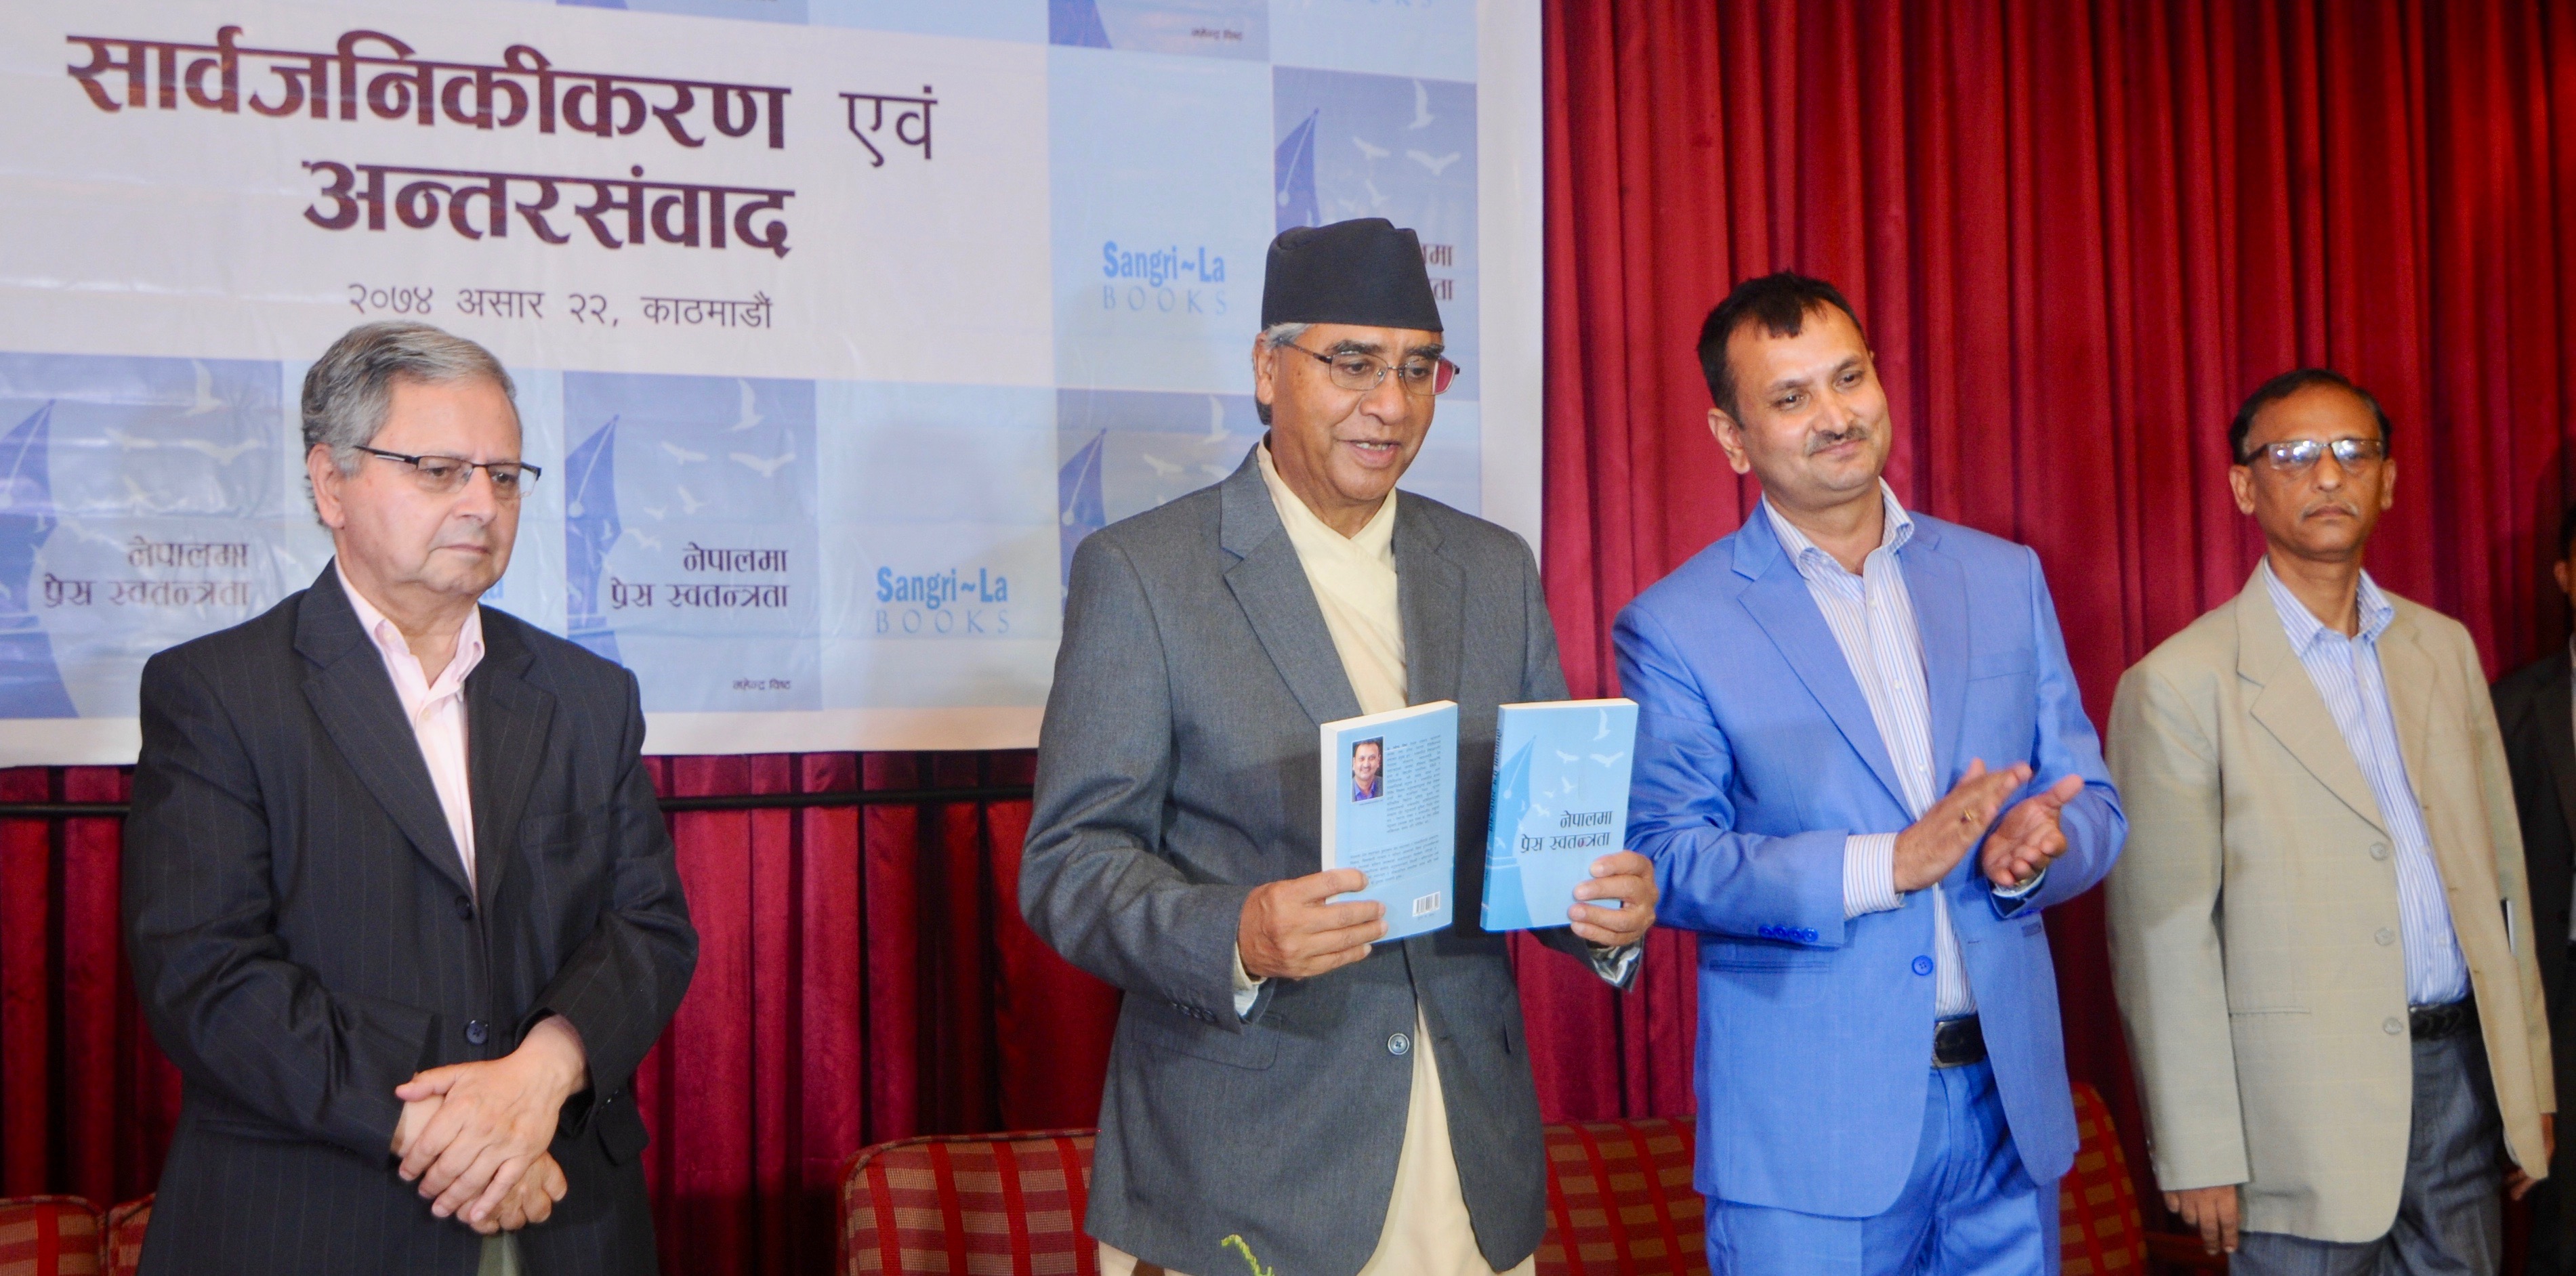 ‘Press Freedom in Nepal’ launched